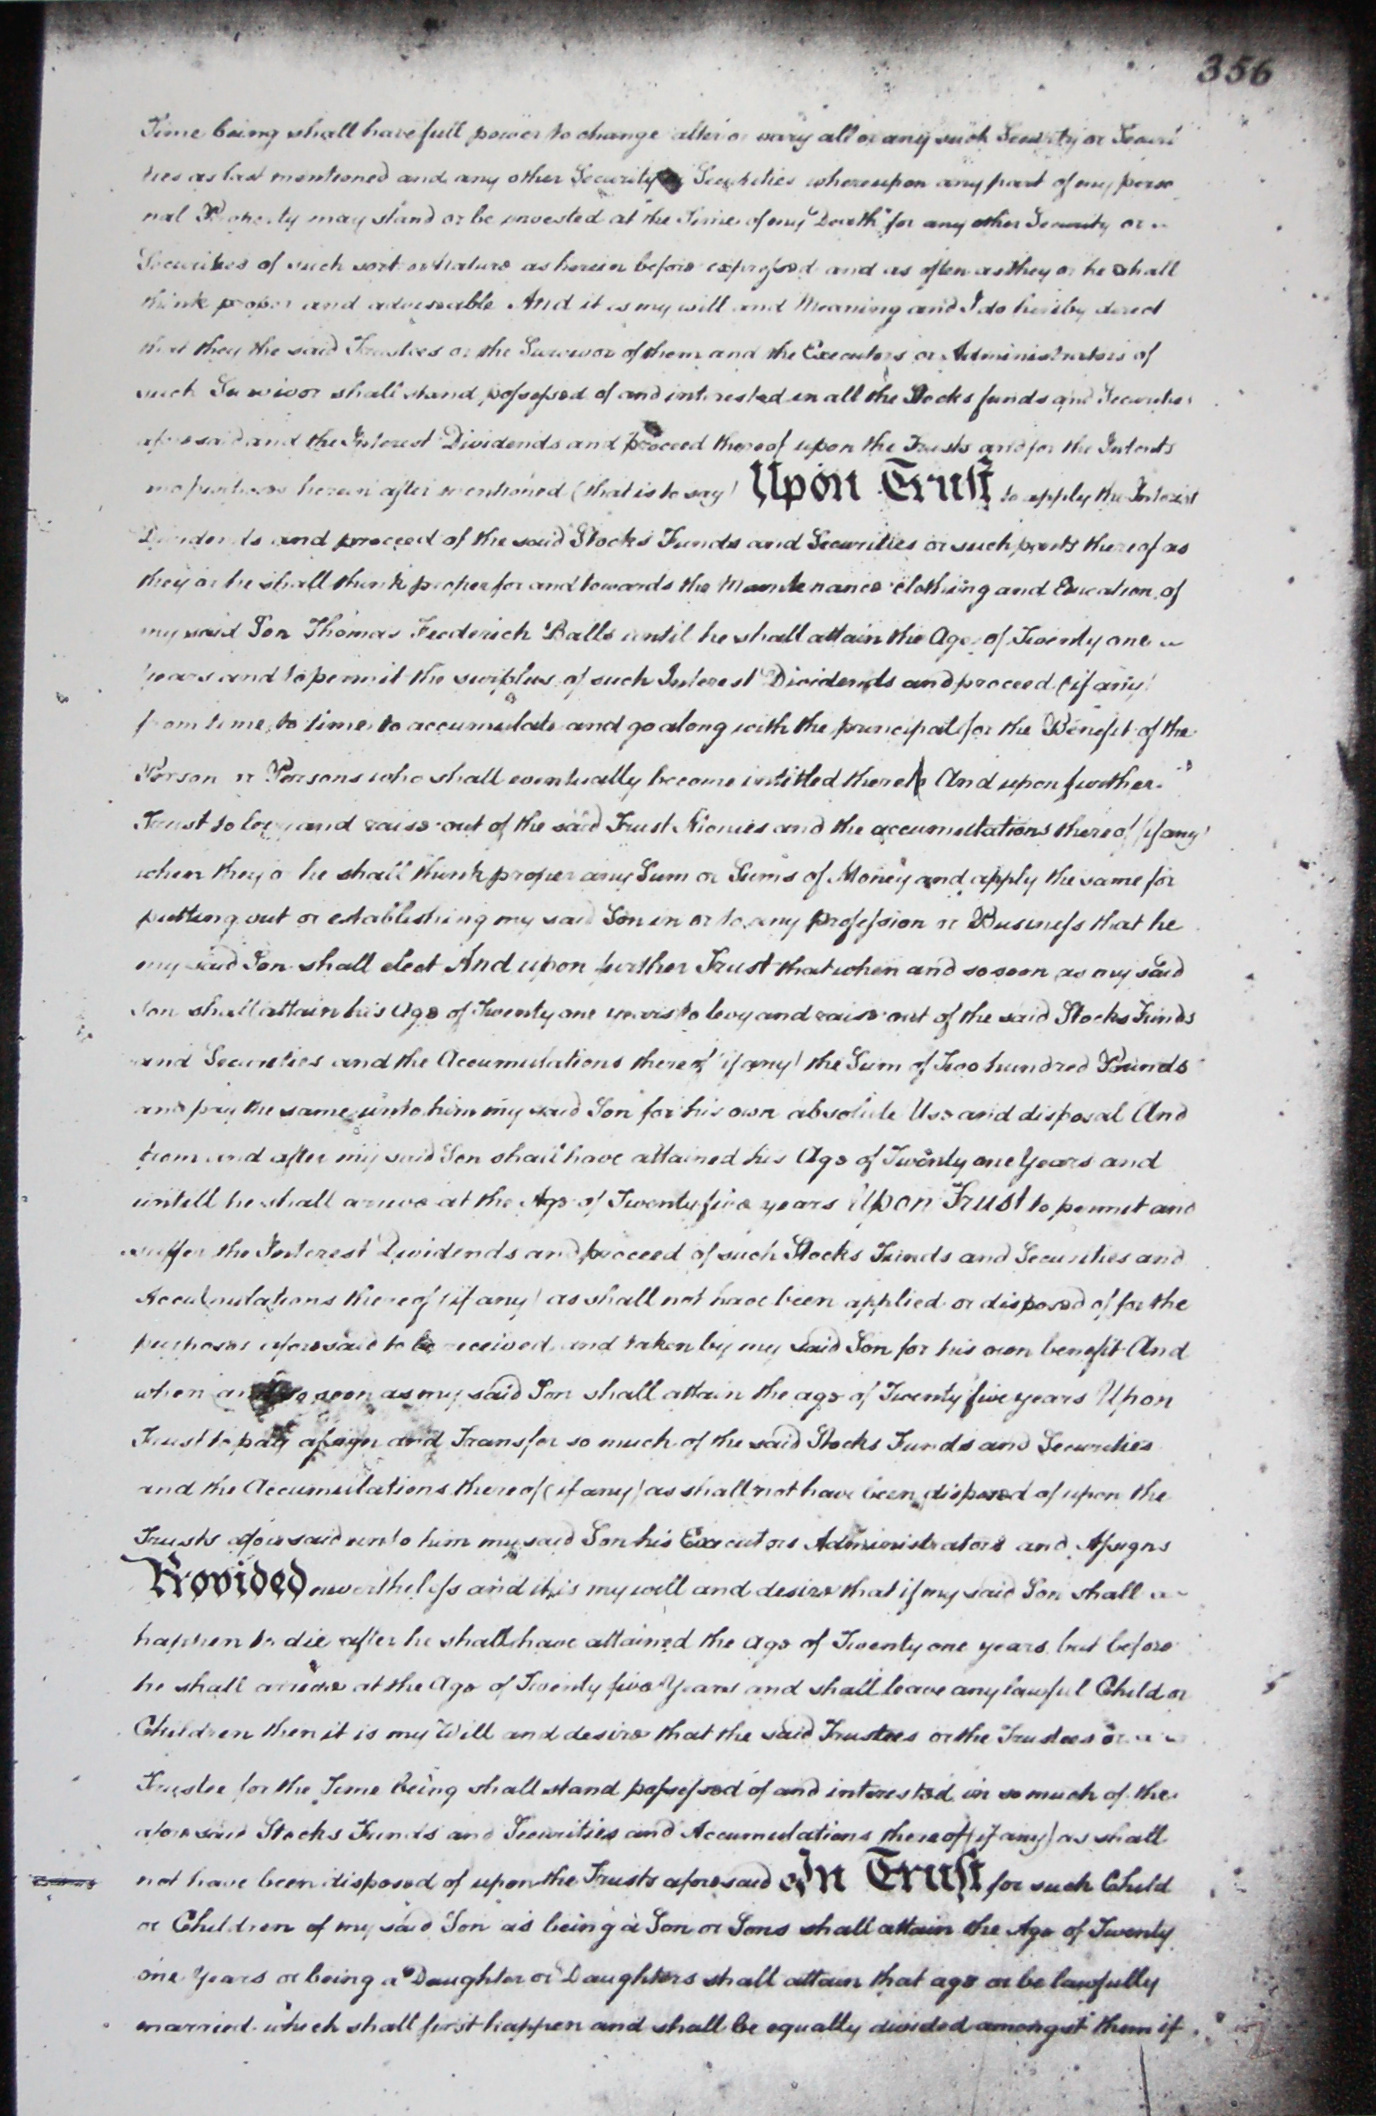 The will of Thomas Frederick Balls, proved in 1810, page 2 detailing how his son would be provided for and inherit the sum of two hundred pounds on reaching 21